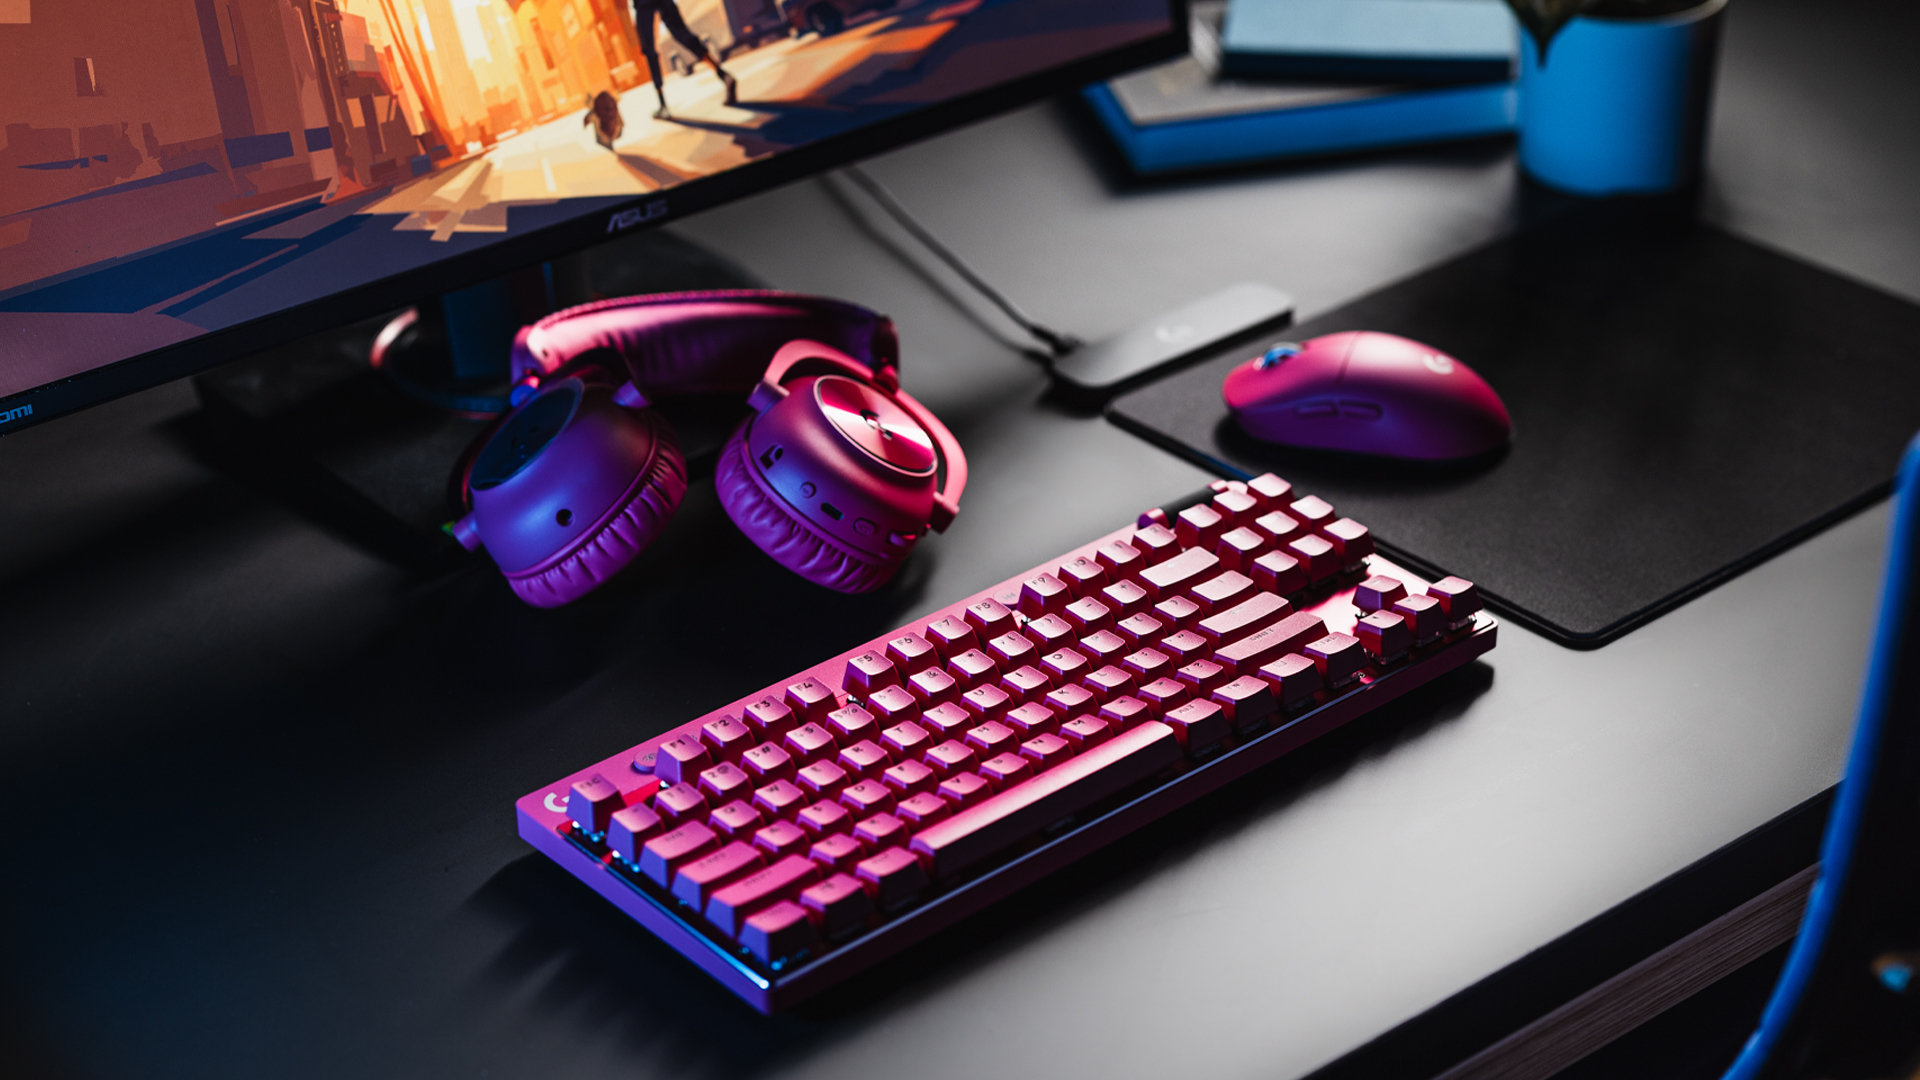 Mouse Logitech G Pro Gaming